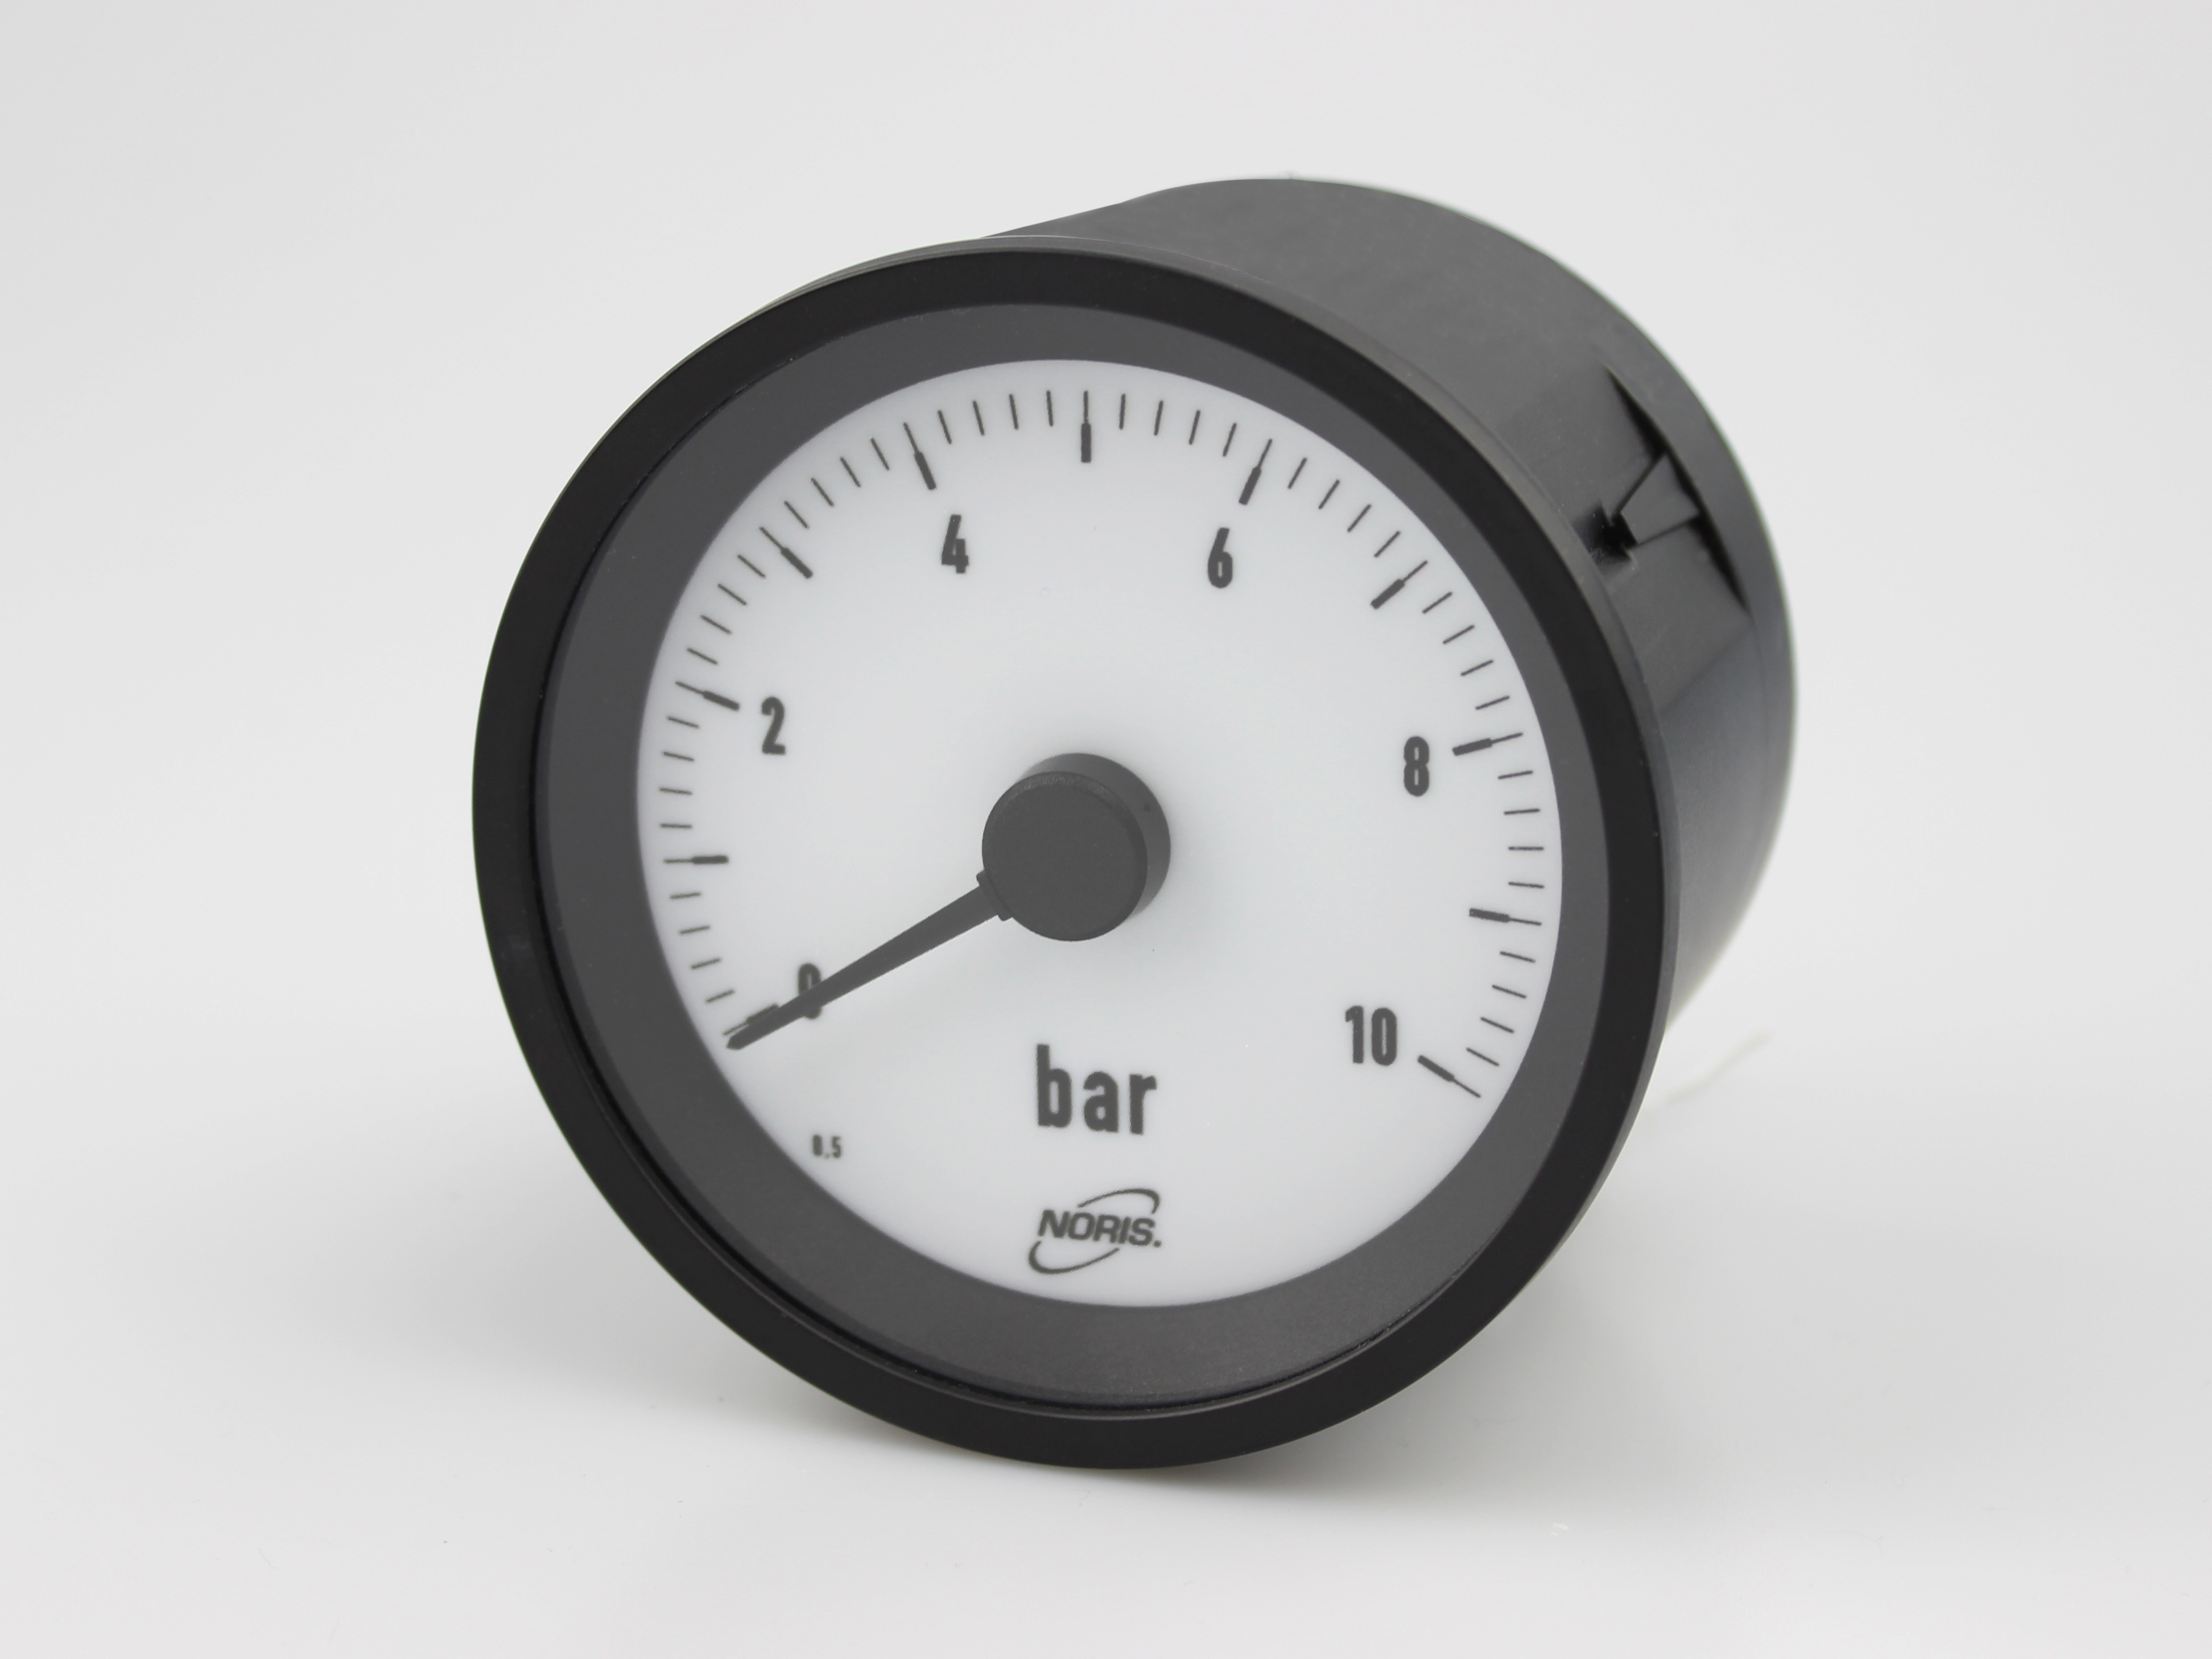 Round analogue indicator with white scale and black pointer